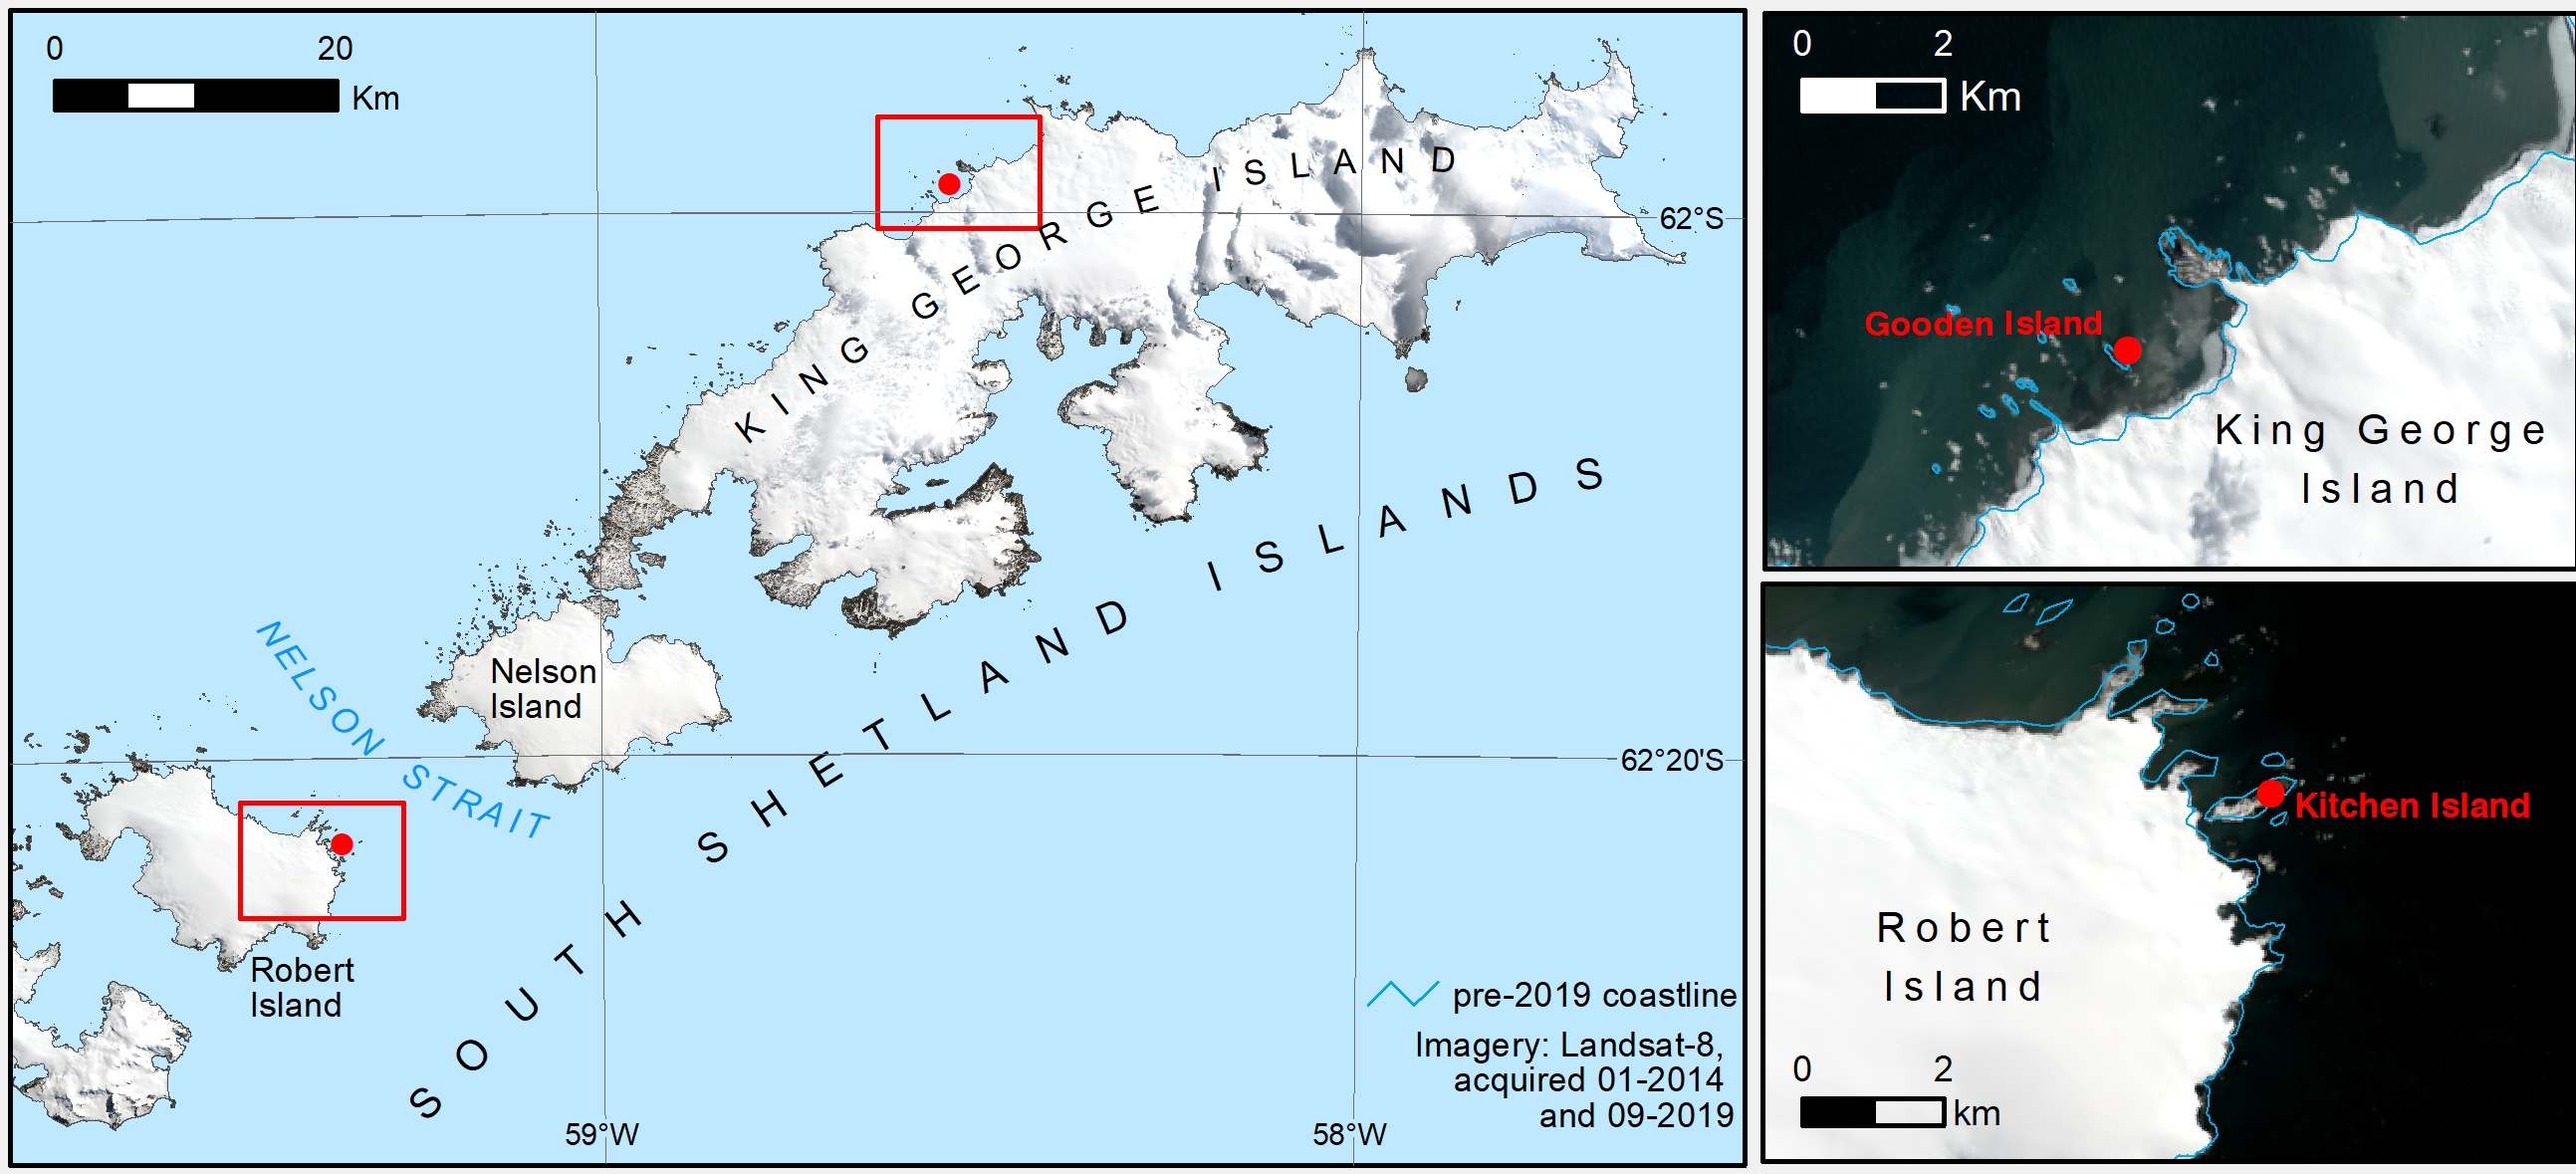 Changes to Place Names in the South Shetland Islands